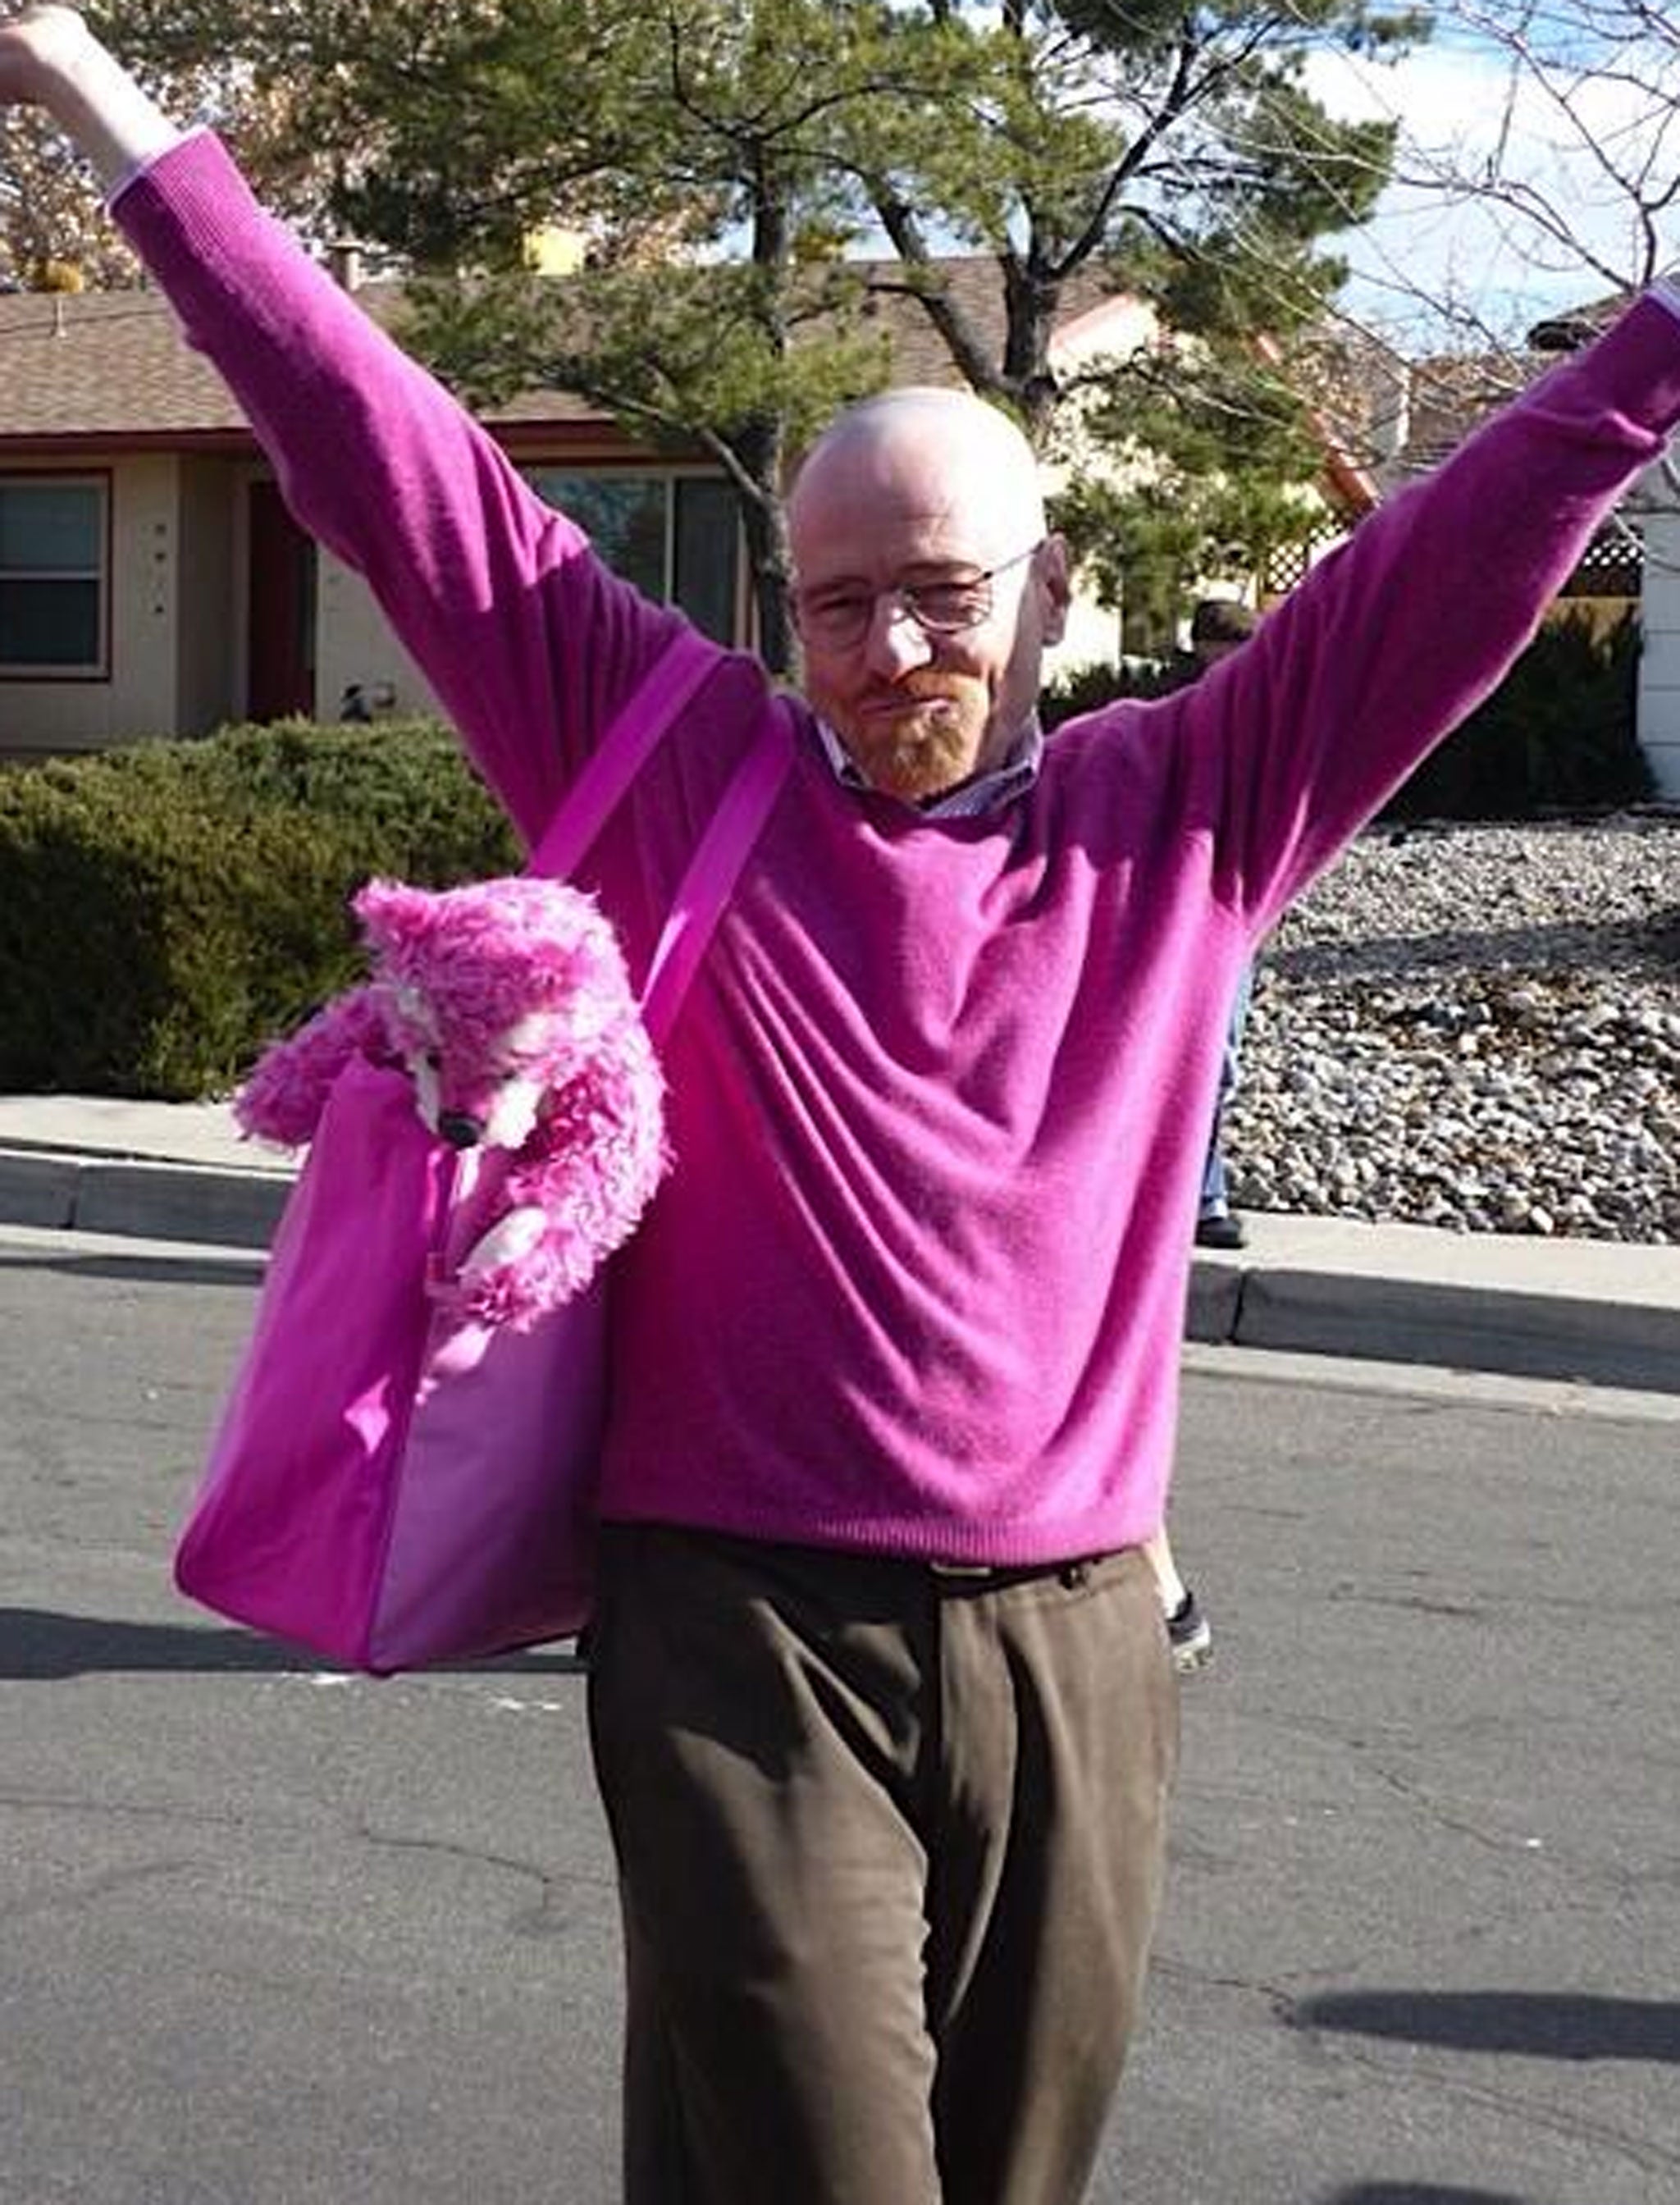 Breaking Bad Walter White really a Pink Man - The Independent